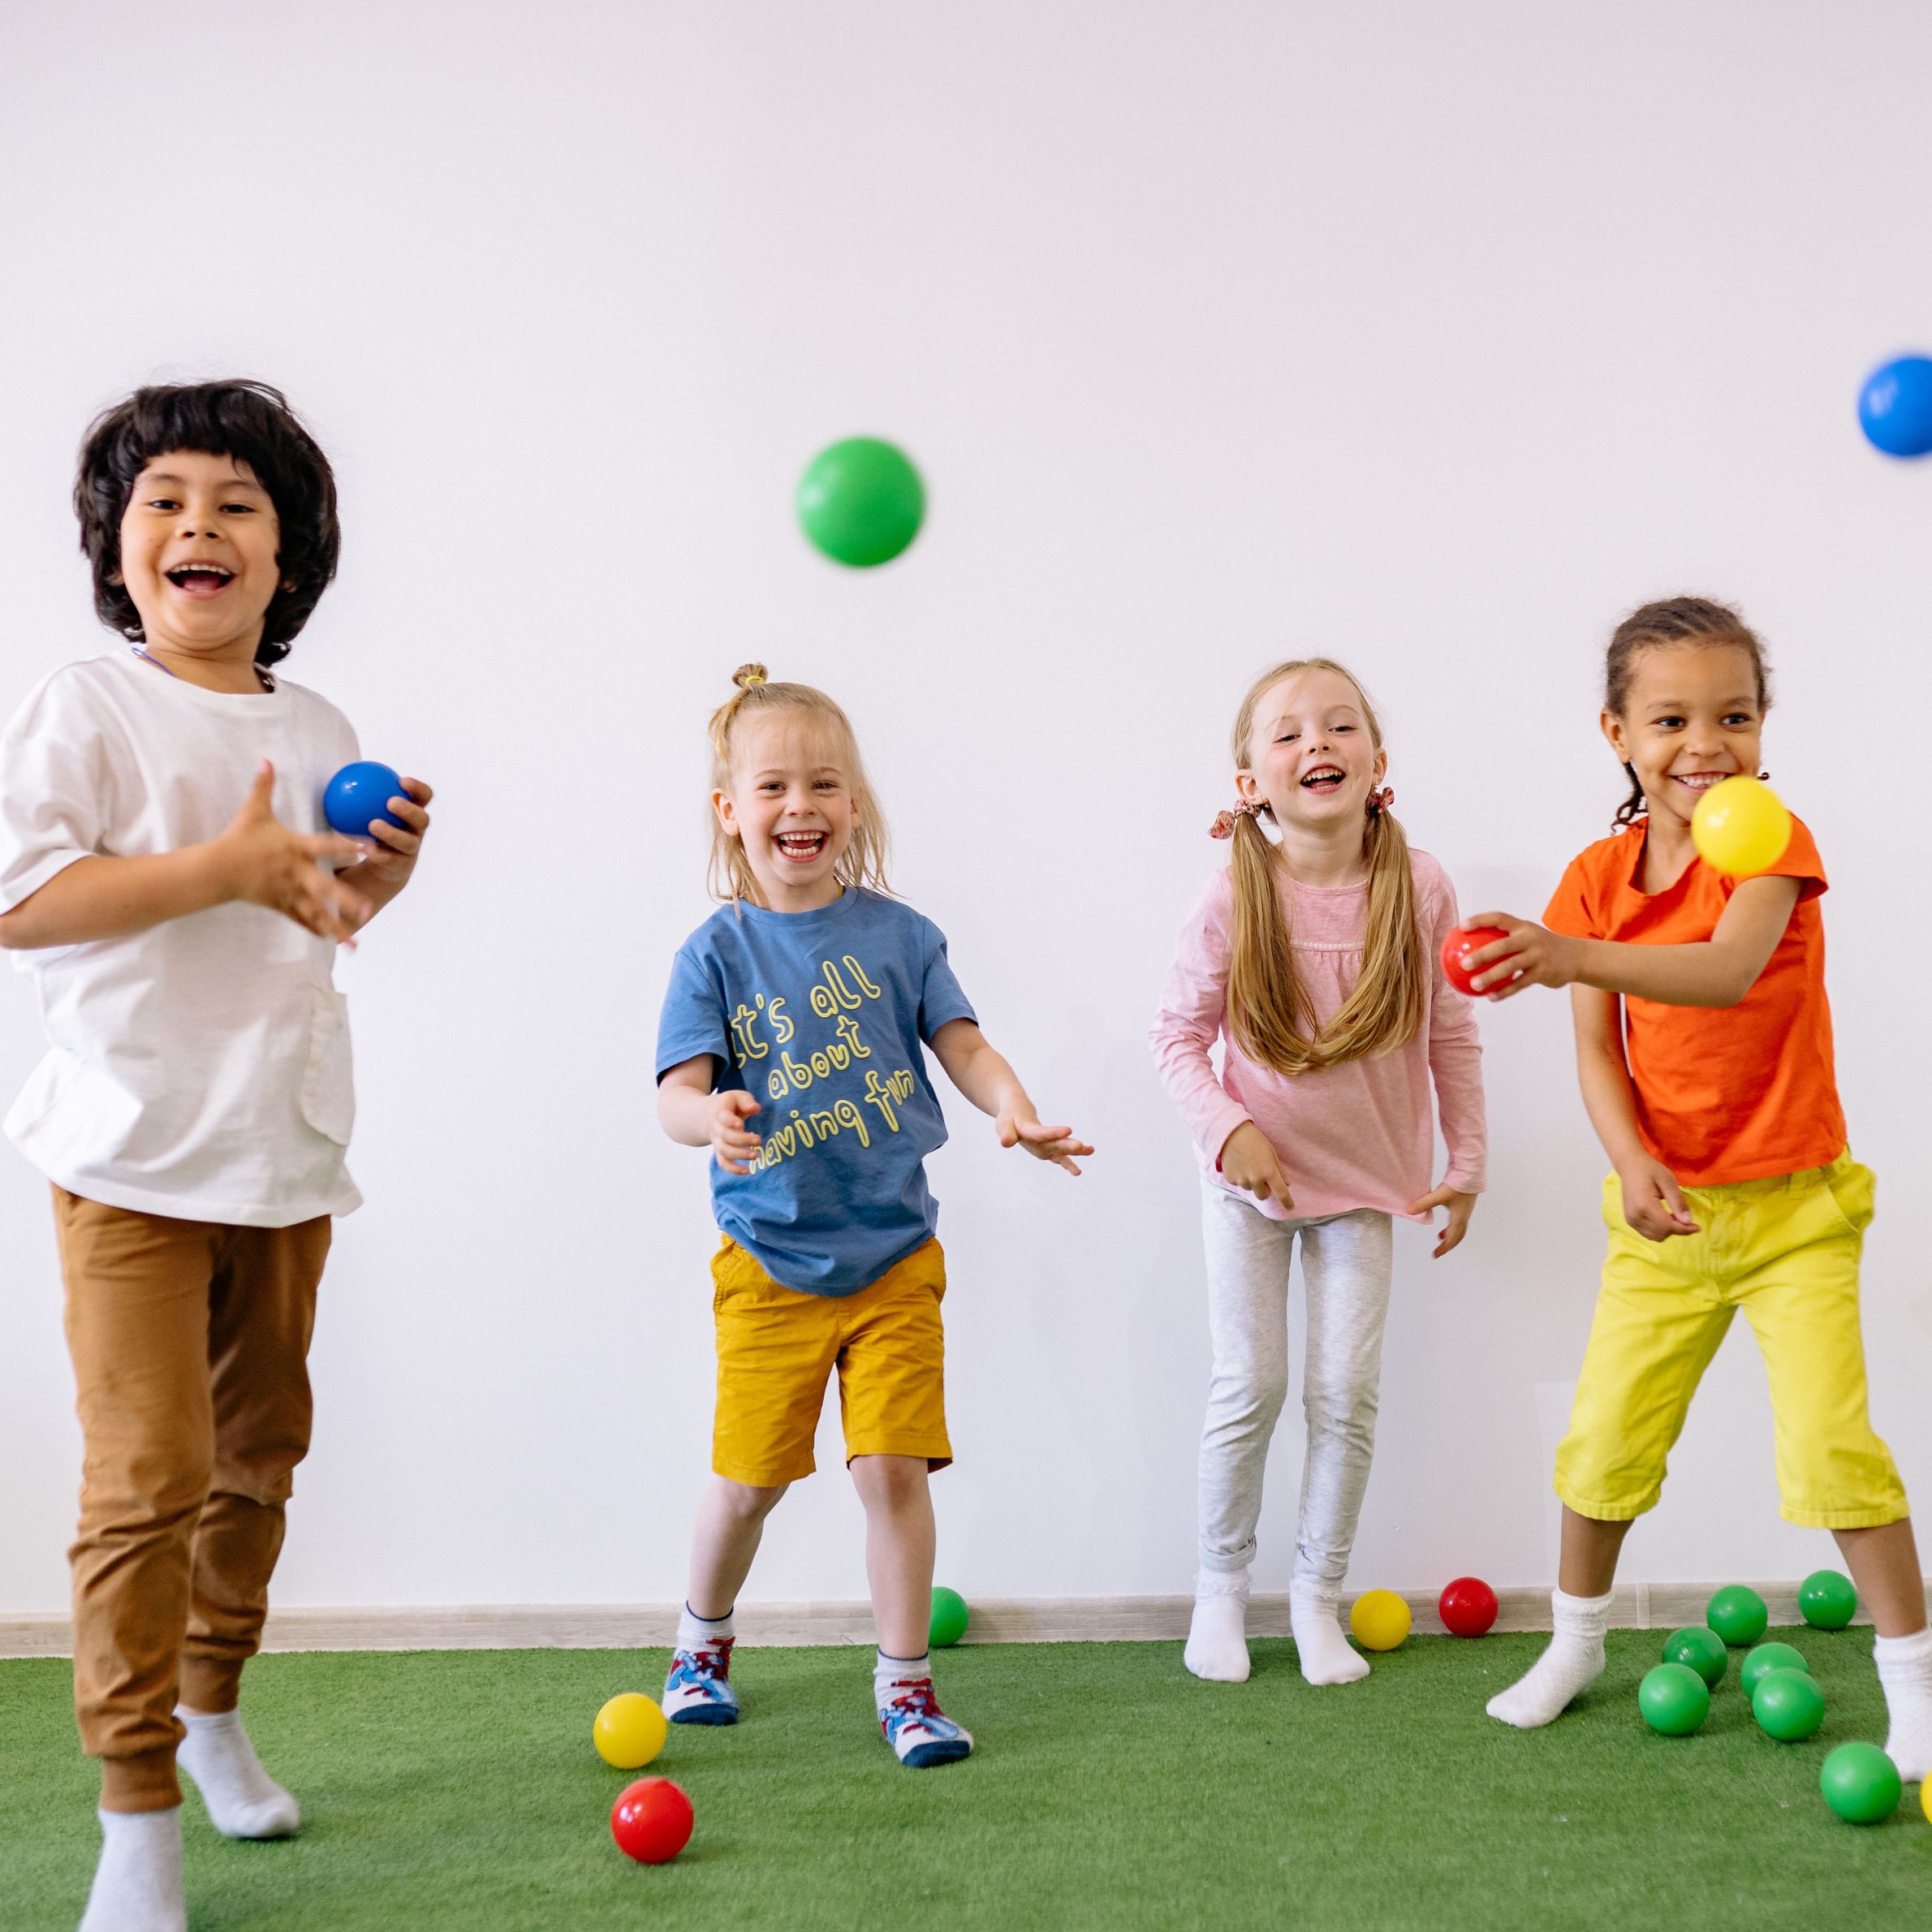 Photograph of kids playing with balls